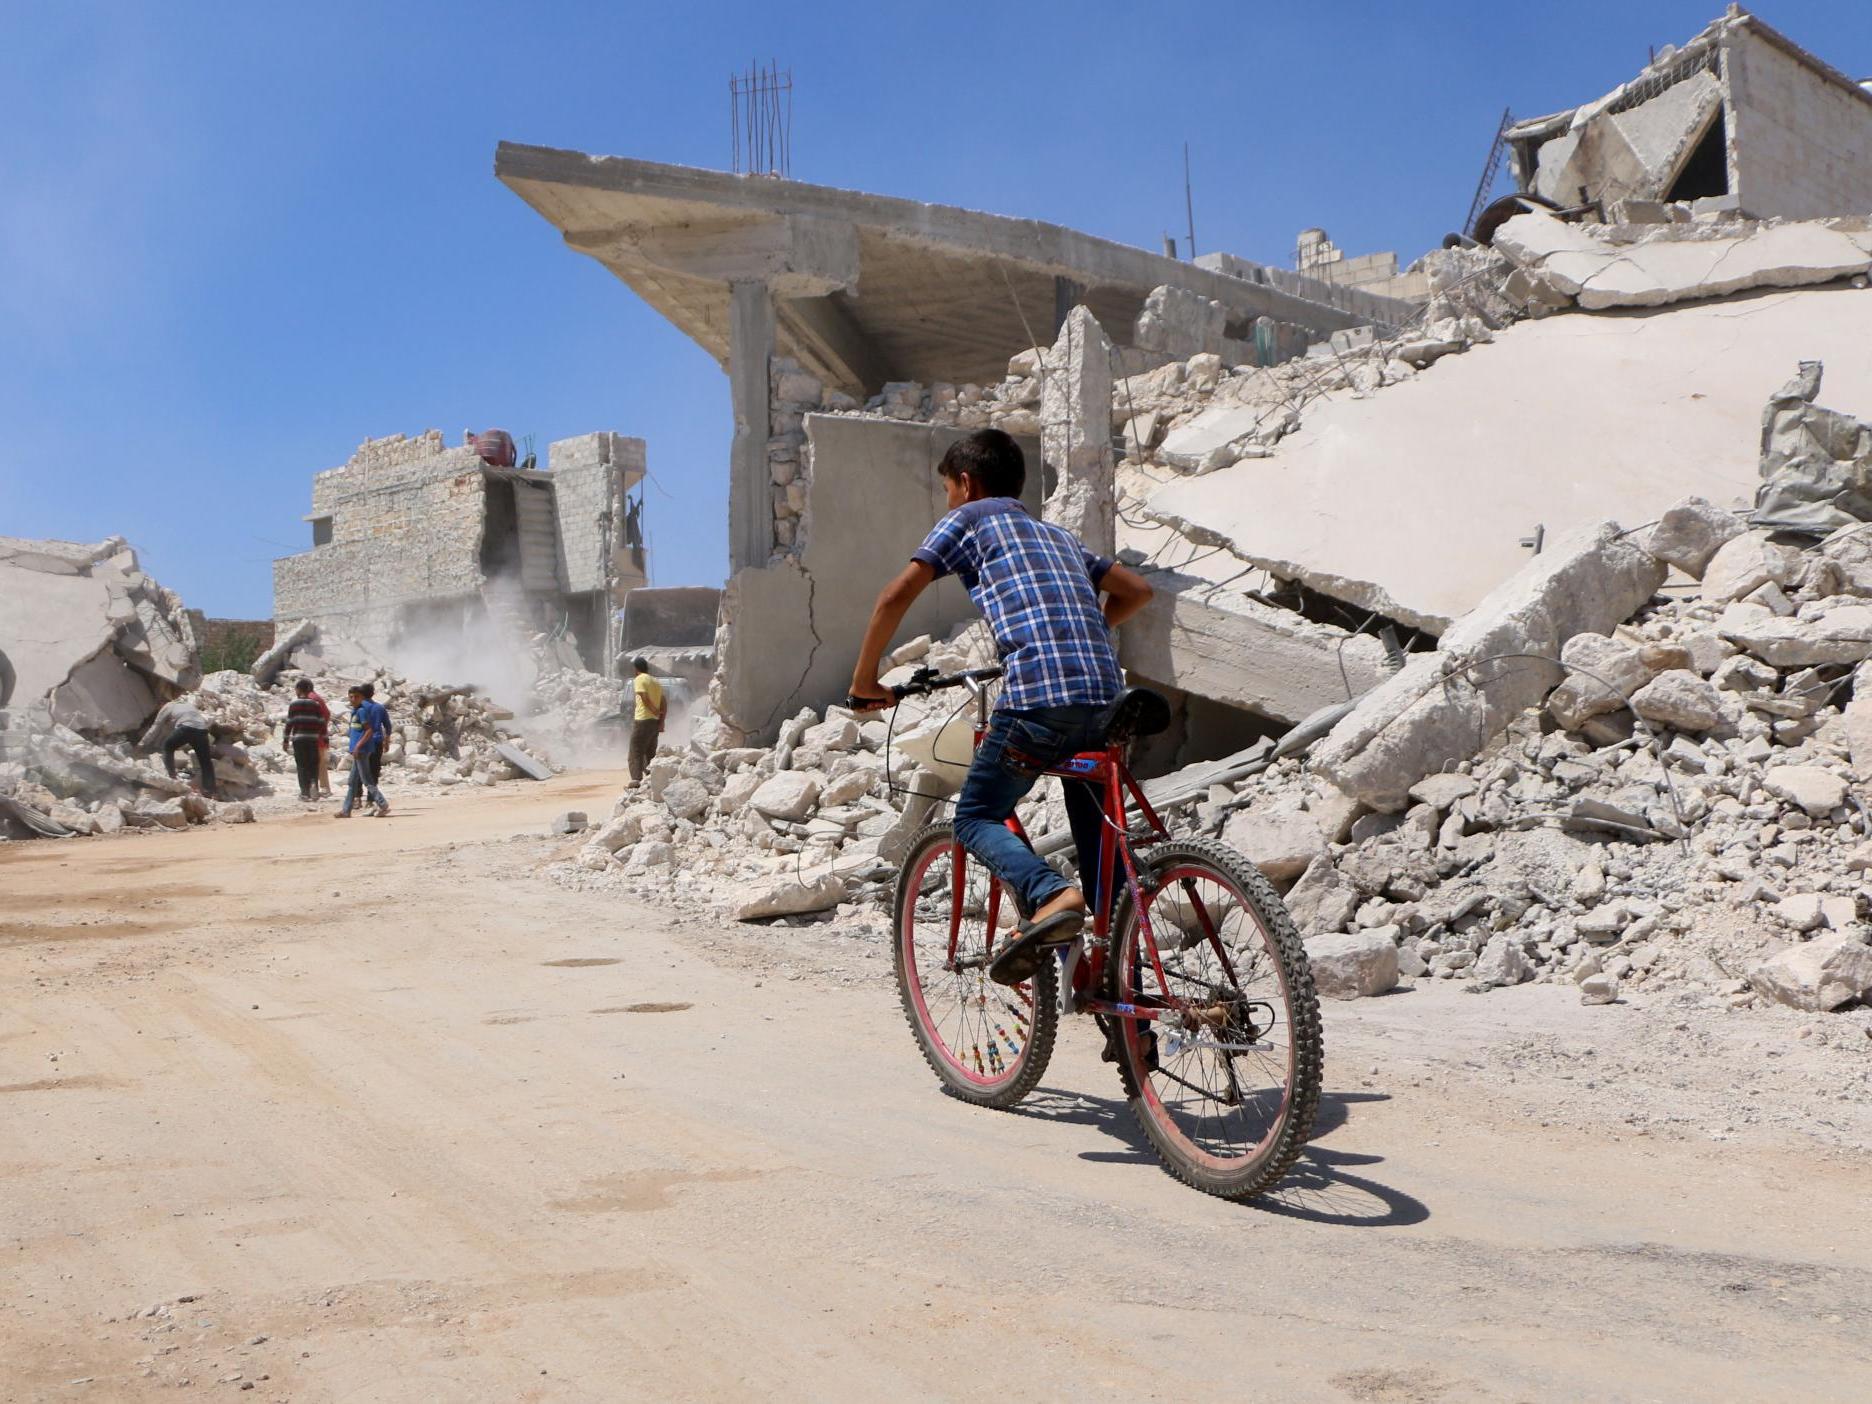 A boy rides his bicycle in the Syrian ebel-held town of Orum al-Kubra in northern Aleppo province near Idlib on 11 August 2018